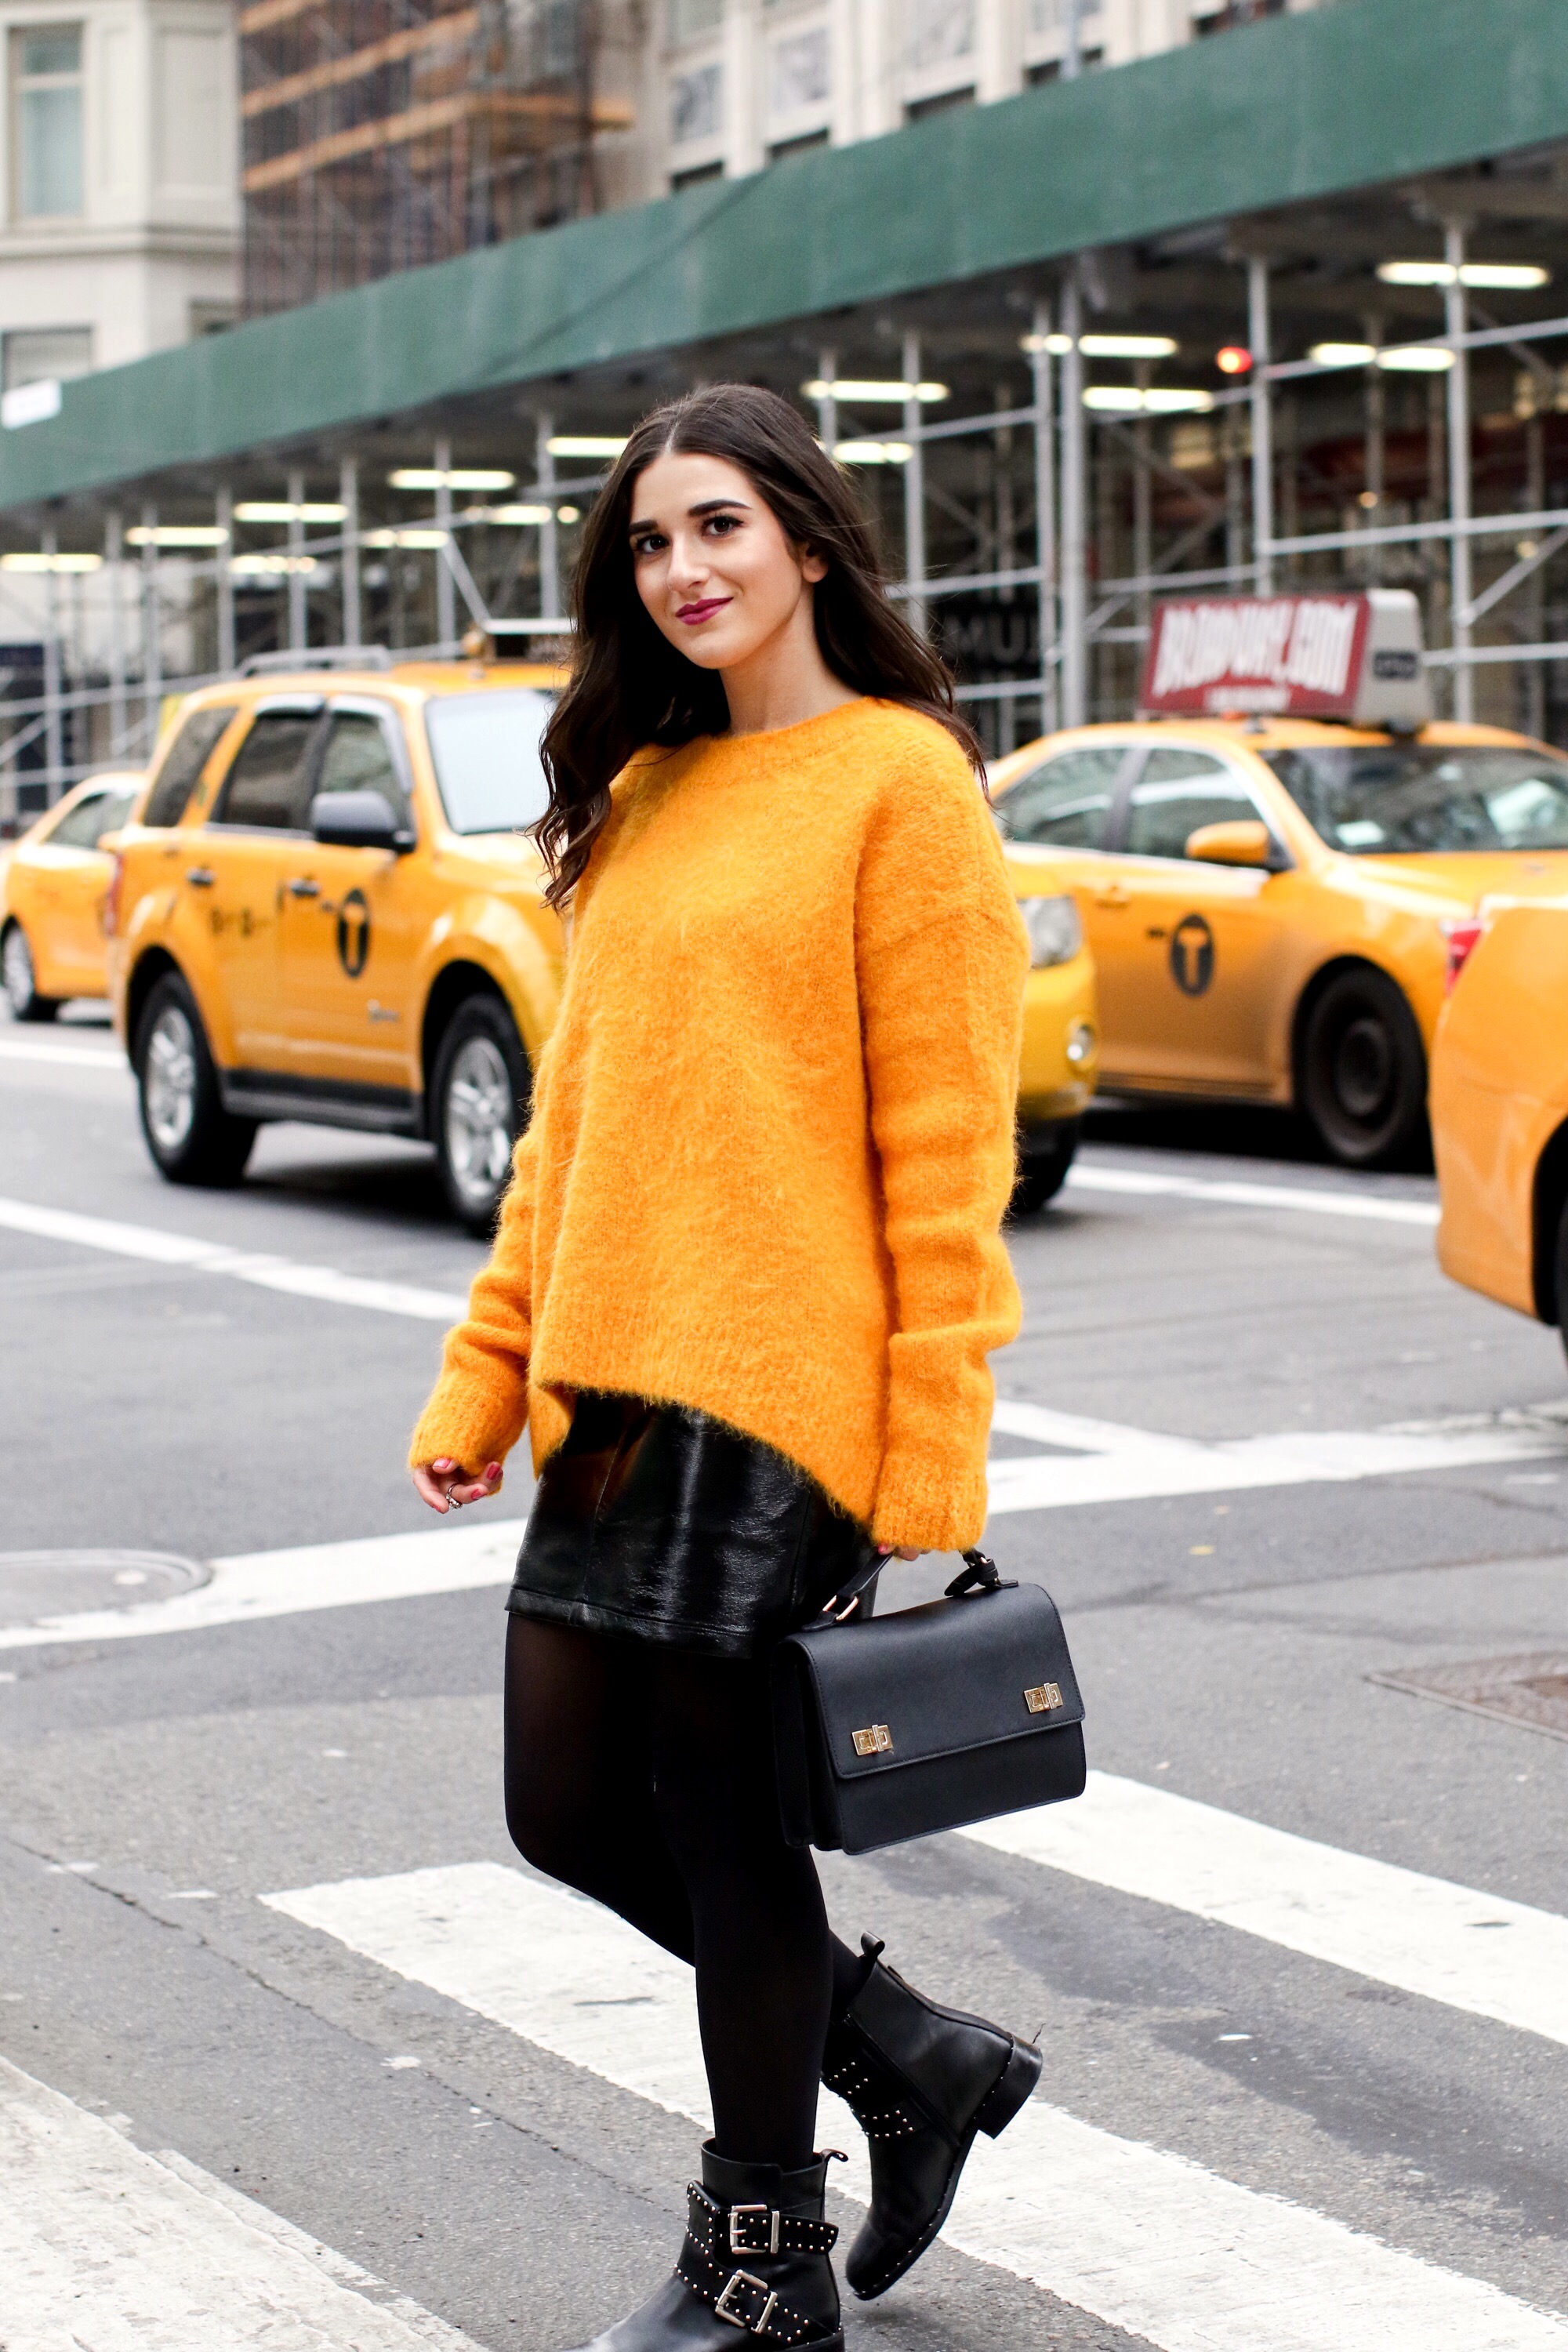 Yellow Sweater Pleather Skirt Why You Should Think Before You Unfollow Esther Santer Fashion Blog NYC Street Style Blogger Outfit OOTD Trendy Cozy Winter Look Girl Women Oversized Top New York City Instagram Tips DSW Studded  Boots H&M Topshop Details.jpg